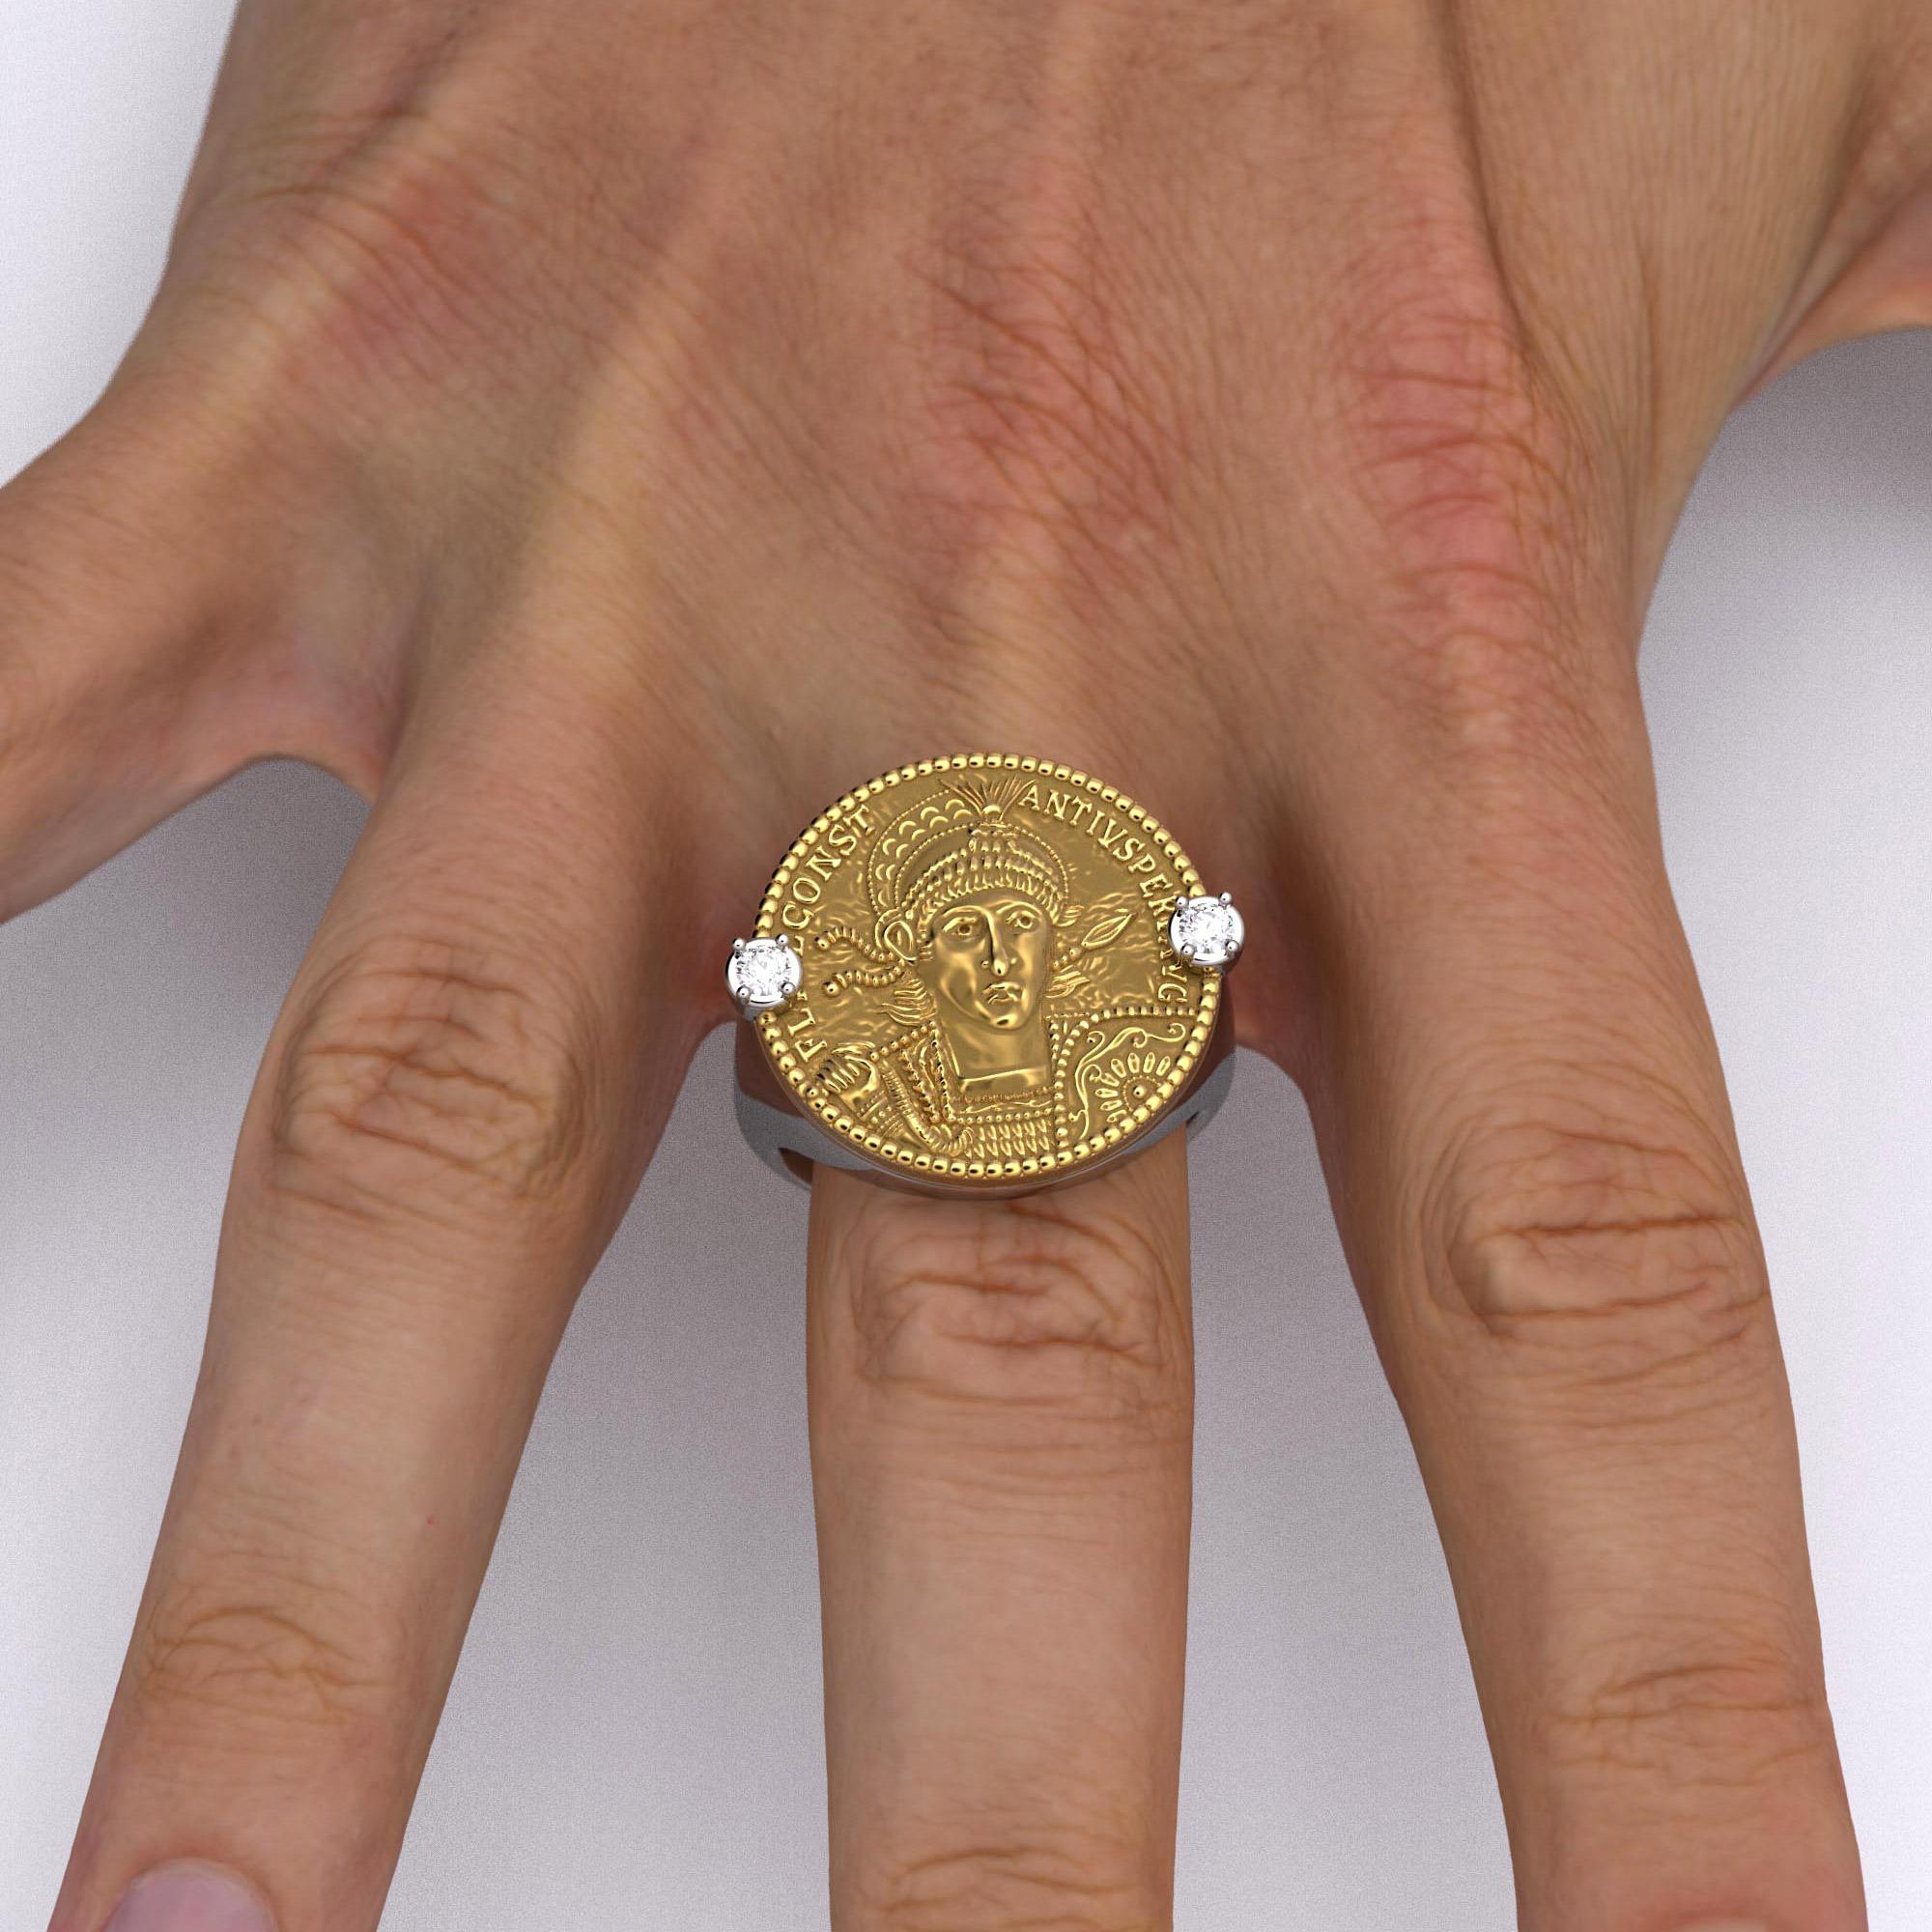 For Sale:  18k Ancient Roman Style Gold Coin Ring with a reproduction of a Roman Solidus 5